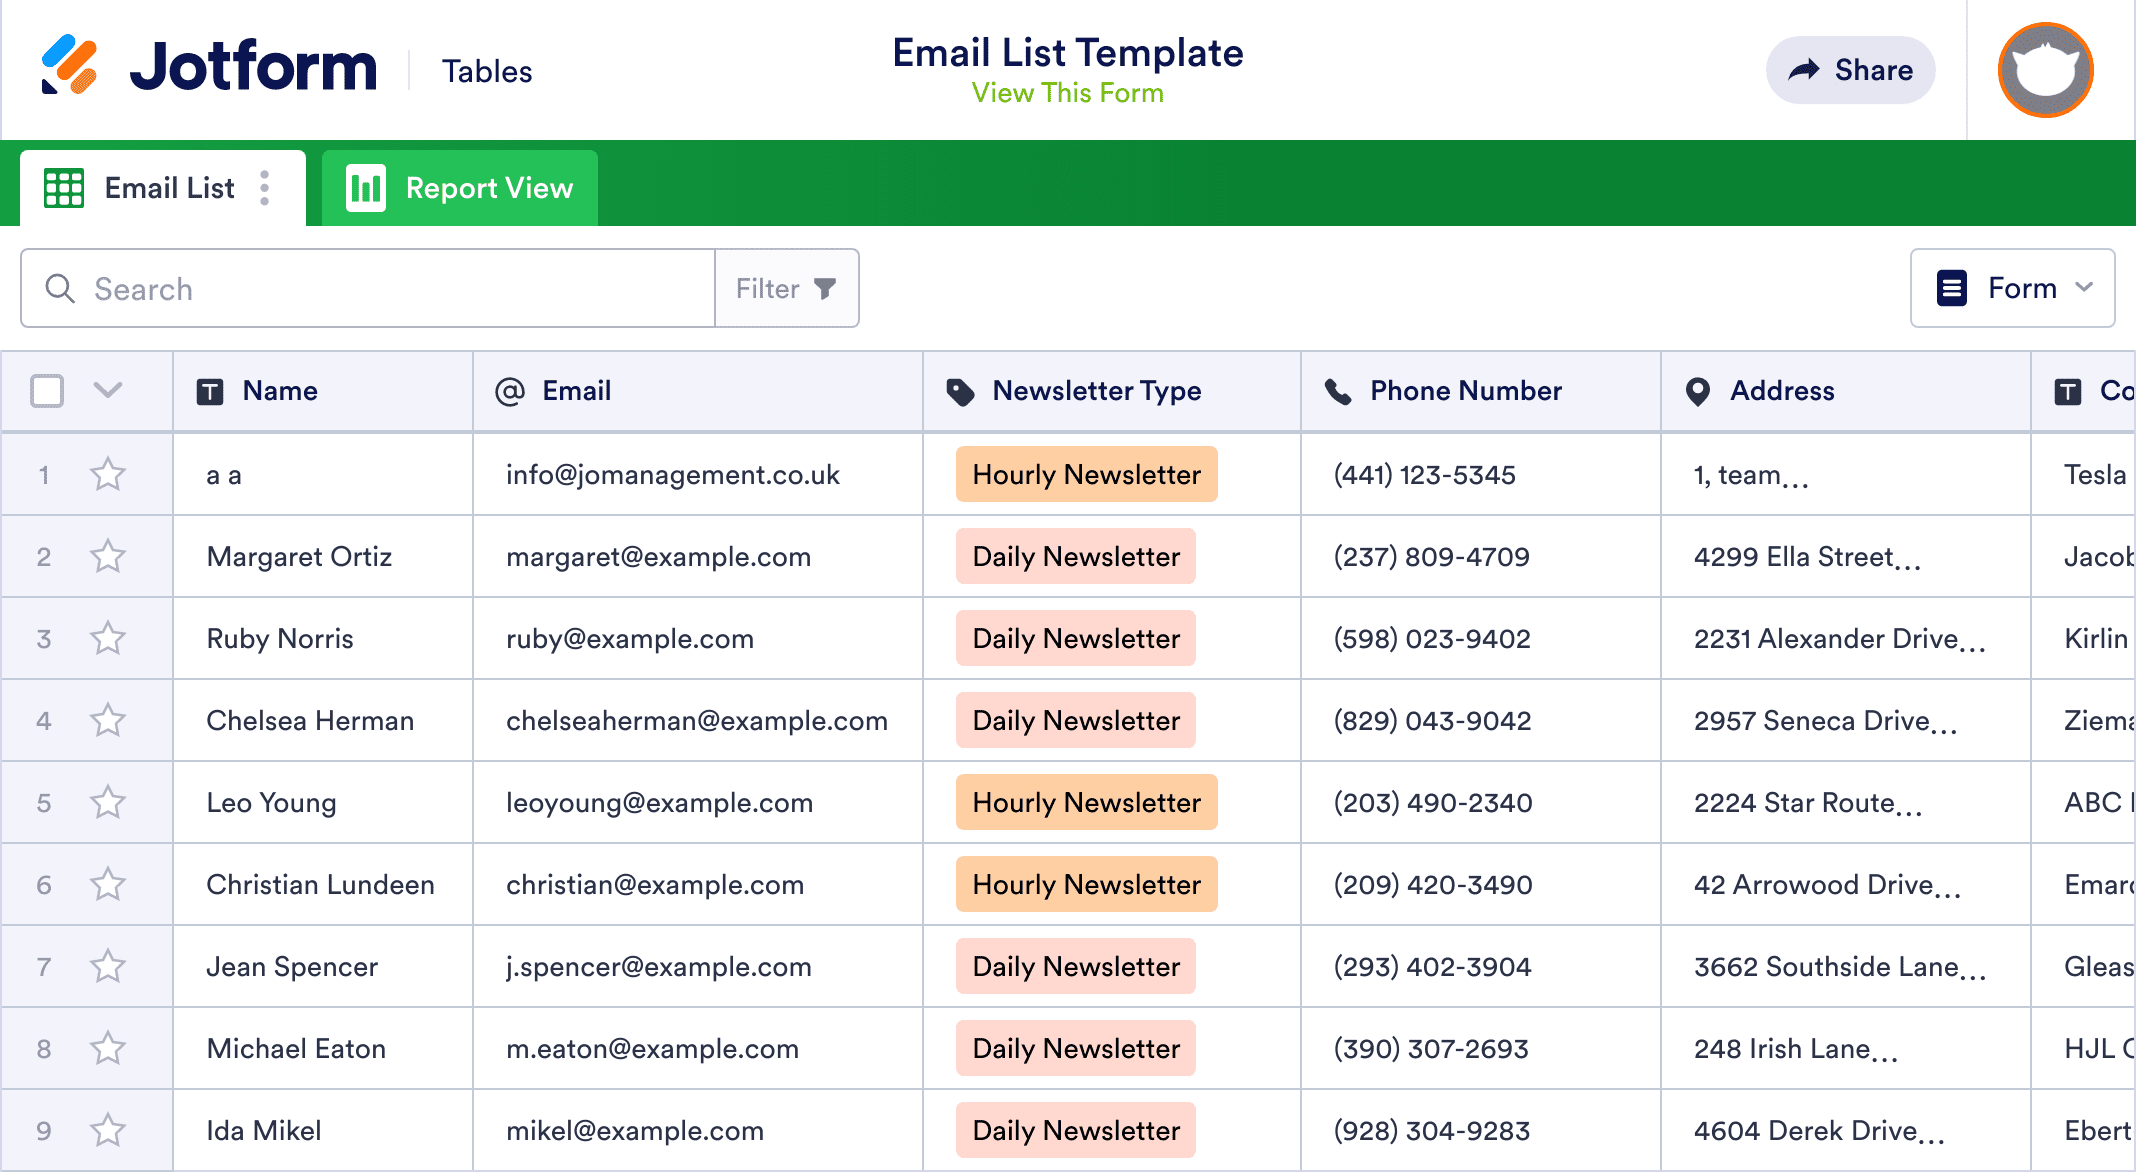 email-list-template-jotform-tables